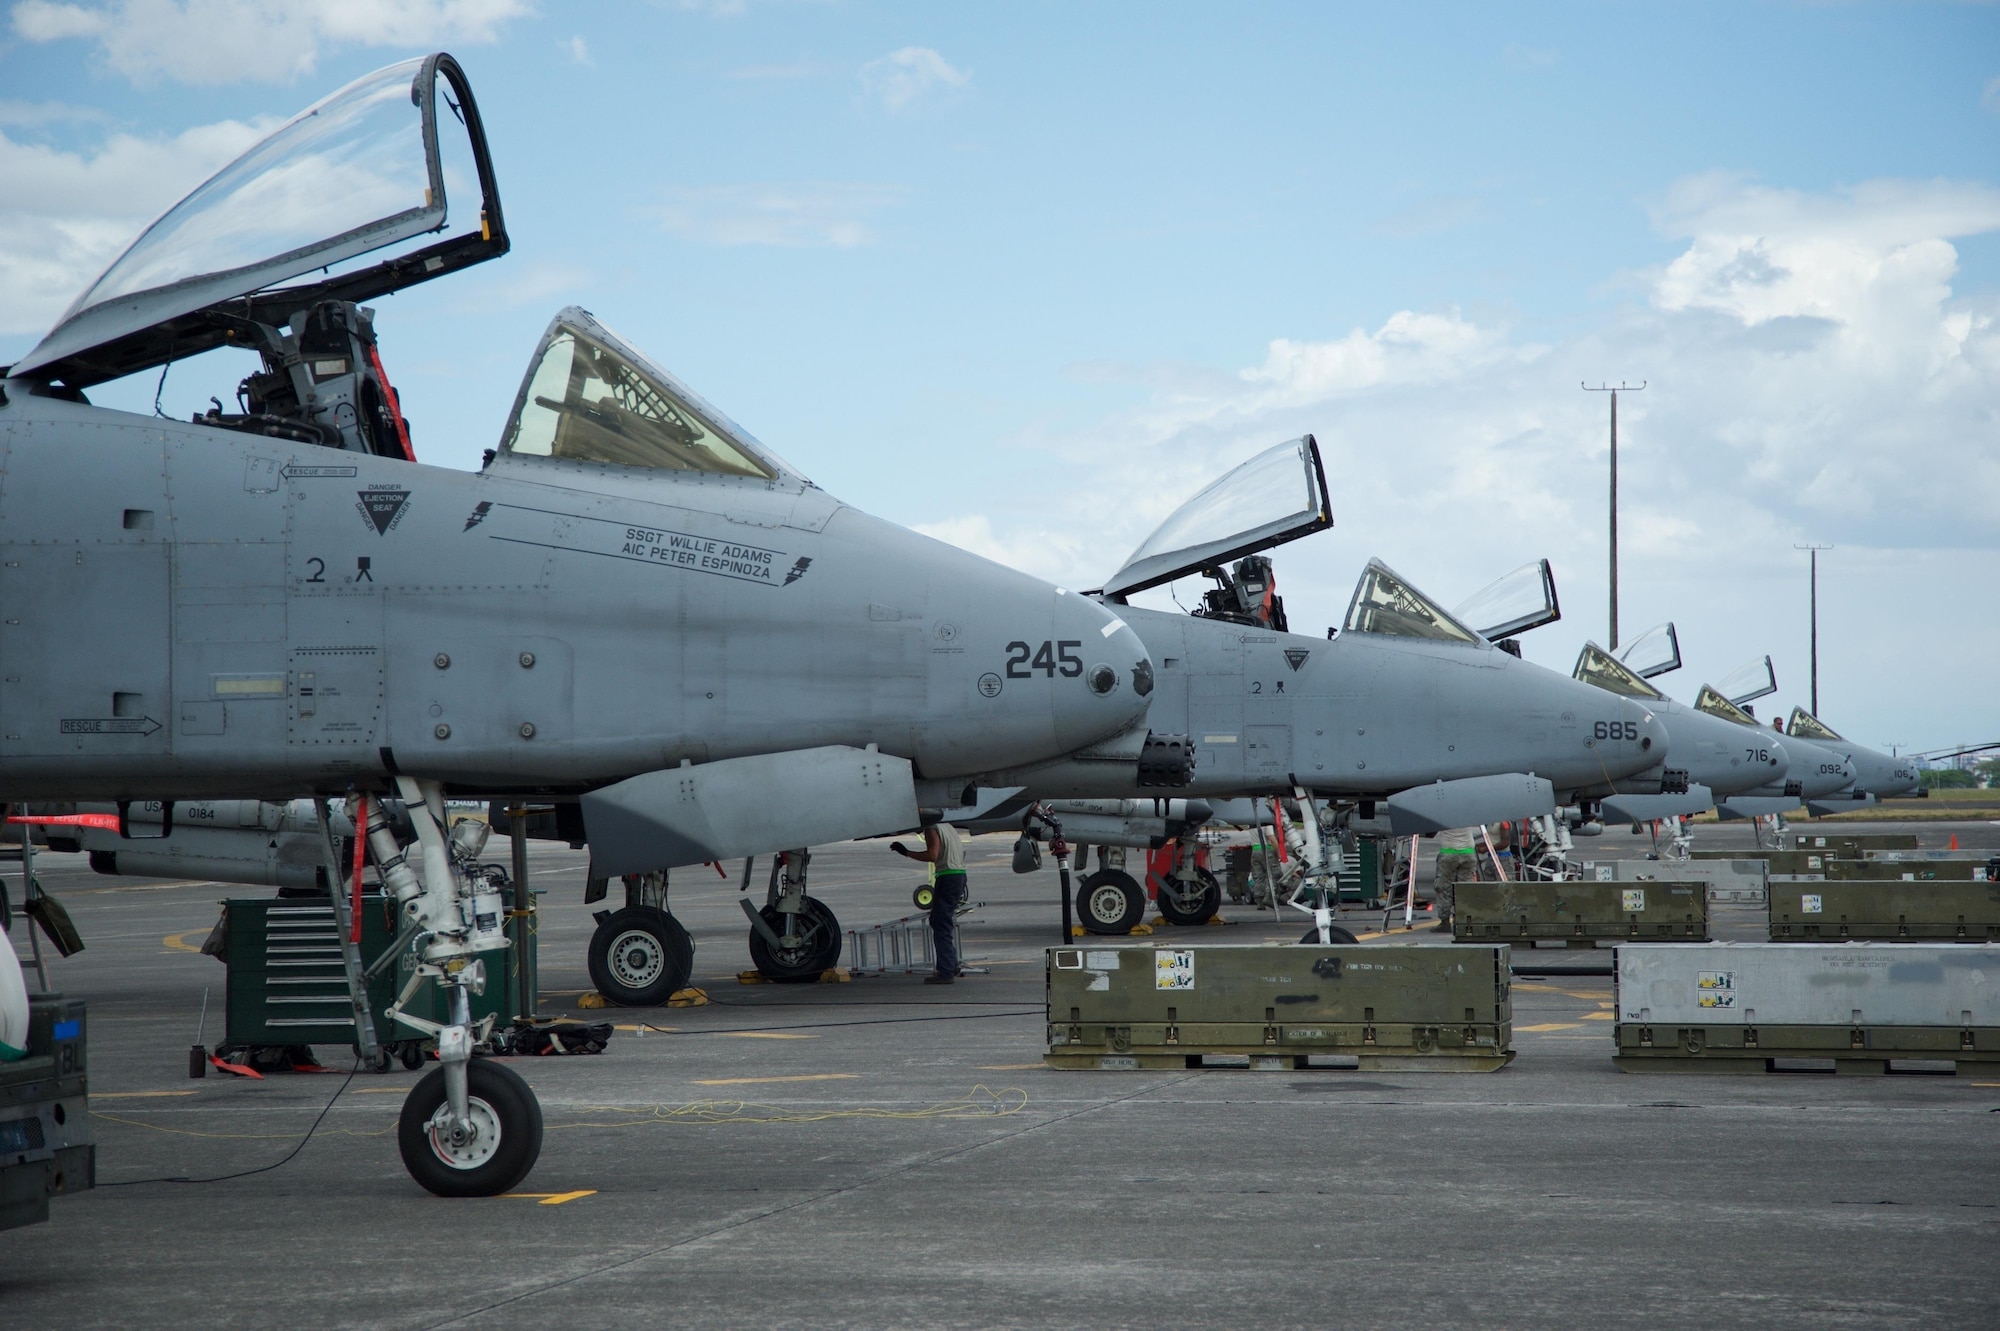 Five A-10C Thunderbolt IIs sit on the flight line at Clark Air Base, Philippines, after flying a training mission April 20, 2016. The aircraft are part of U.S. Pacific Command’s first iteration of an Air Contingent at the base, which was stood up at the invitation of the Philippine government in order to strengthen cooperation and interoperability between the U.S. and Philippines. The Air Contingent provides forces capable of a variety of missions including force projection, air and maritime domain awareness, personnel recovery, combating piracy, assuring access to the air and maritime domains in accordance with international law and ensures safety and transparency of operations in international waters and airspace. (U.S. Air Force photo by Capt. Susan Harrington)